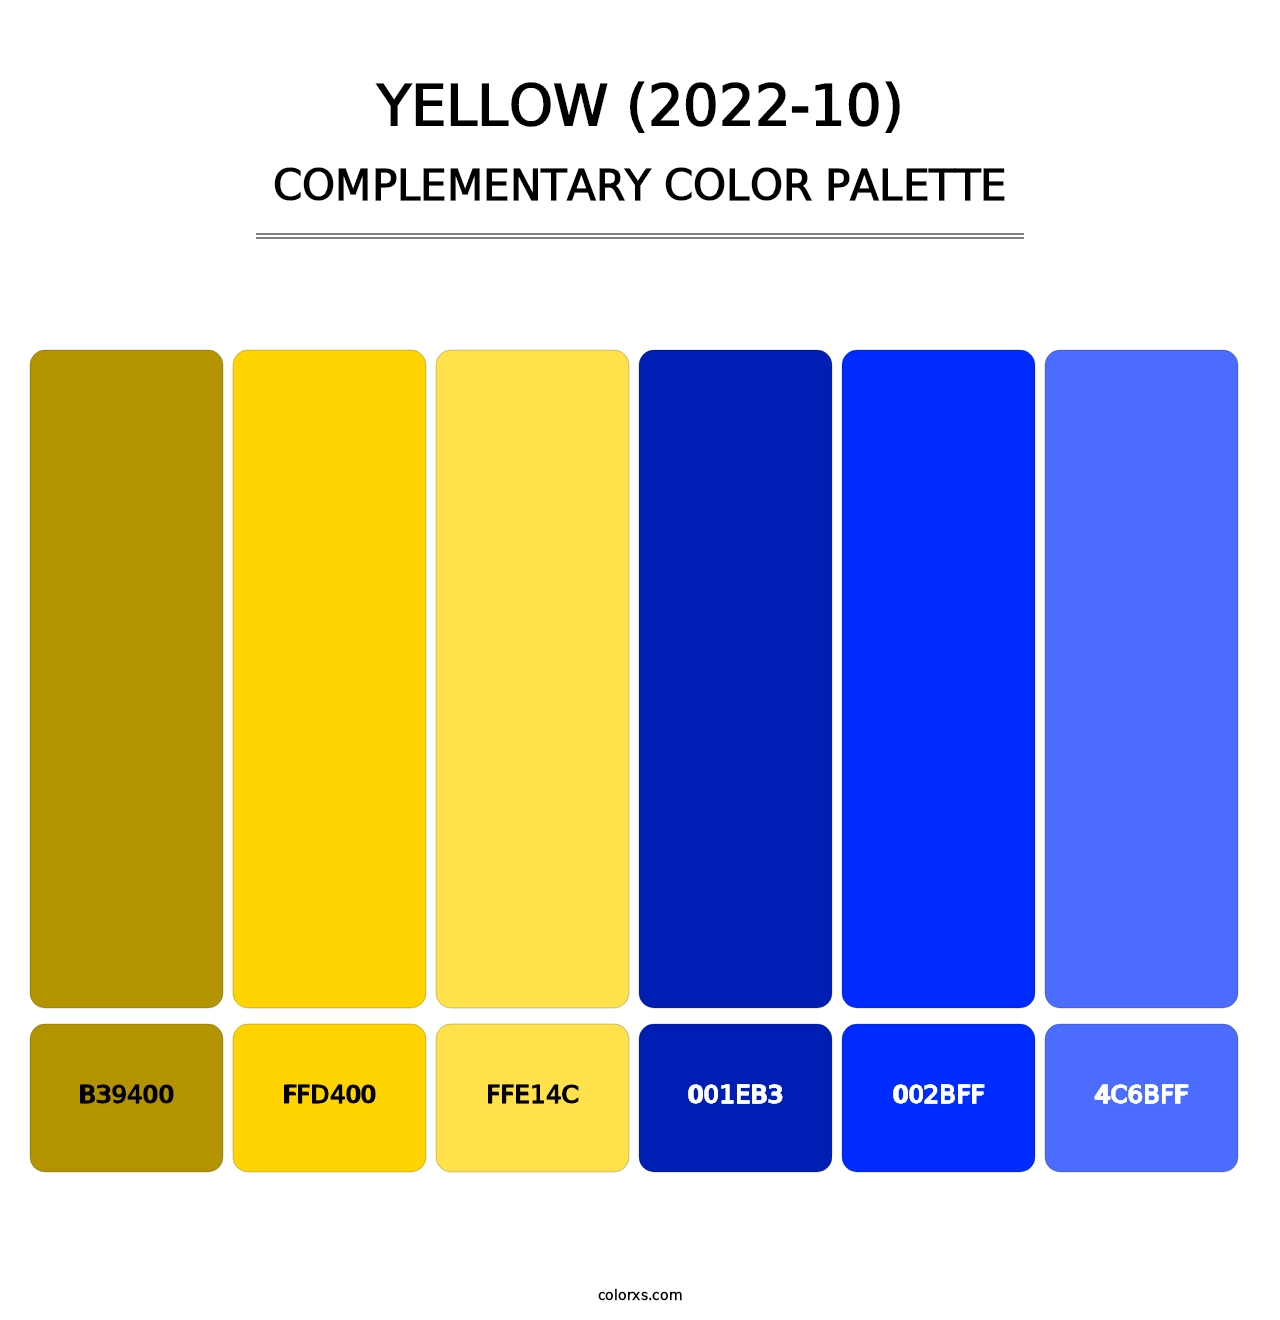 Yellow (2022-10) - Complementary Color Palette